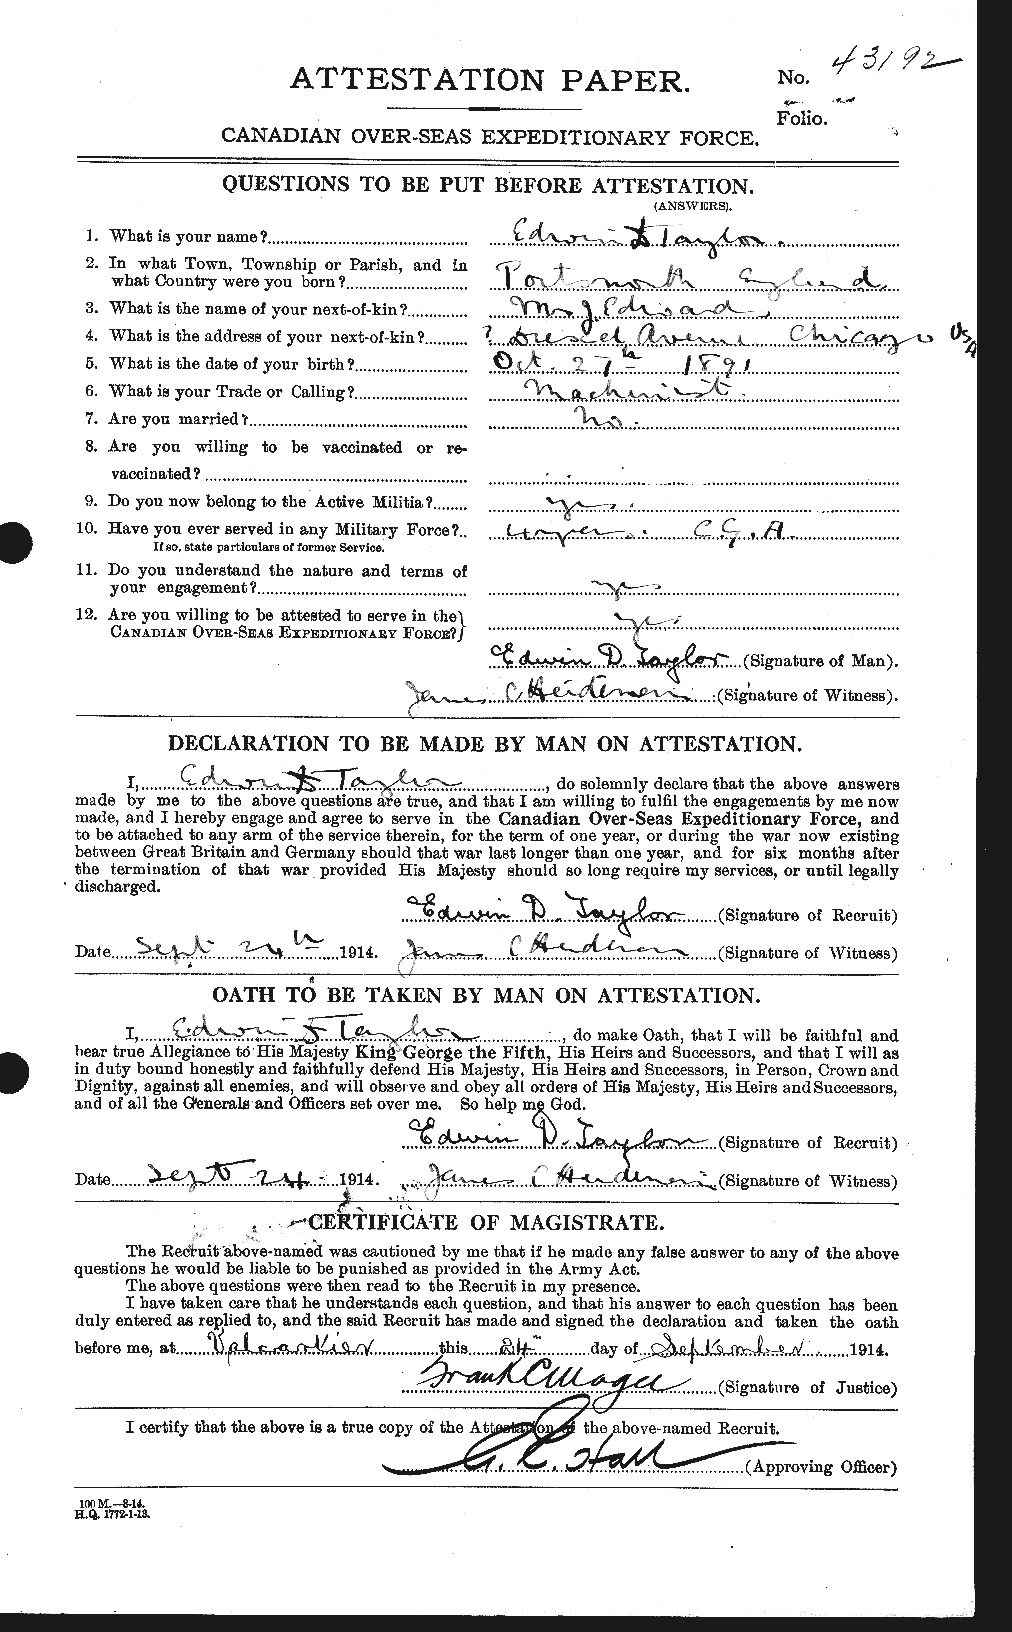 Personnel Records of the First World War - CEF 627341a